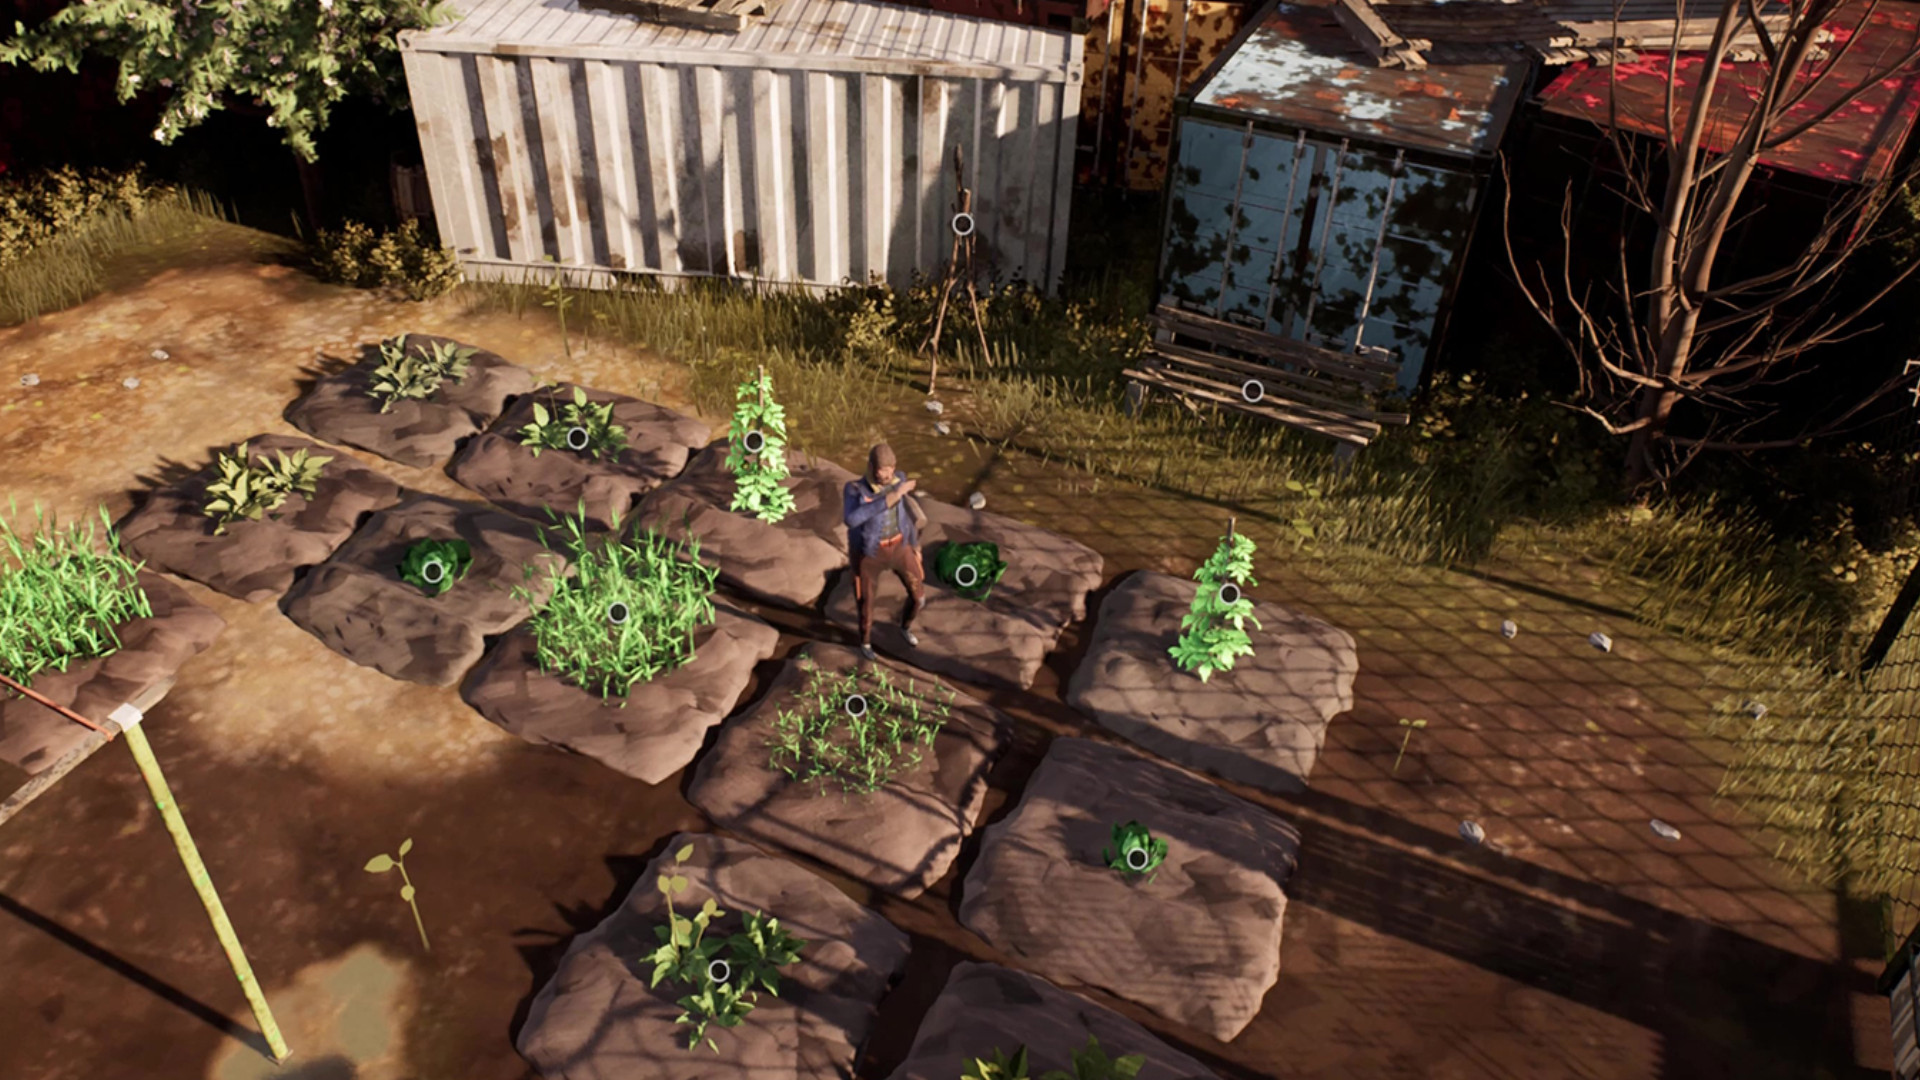 Fallout meets The Sims in this ambitious new sandbox survival game